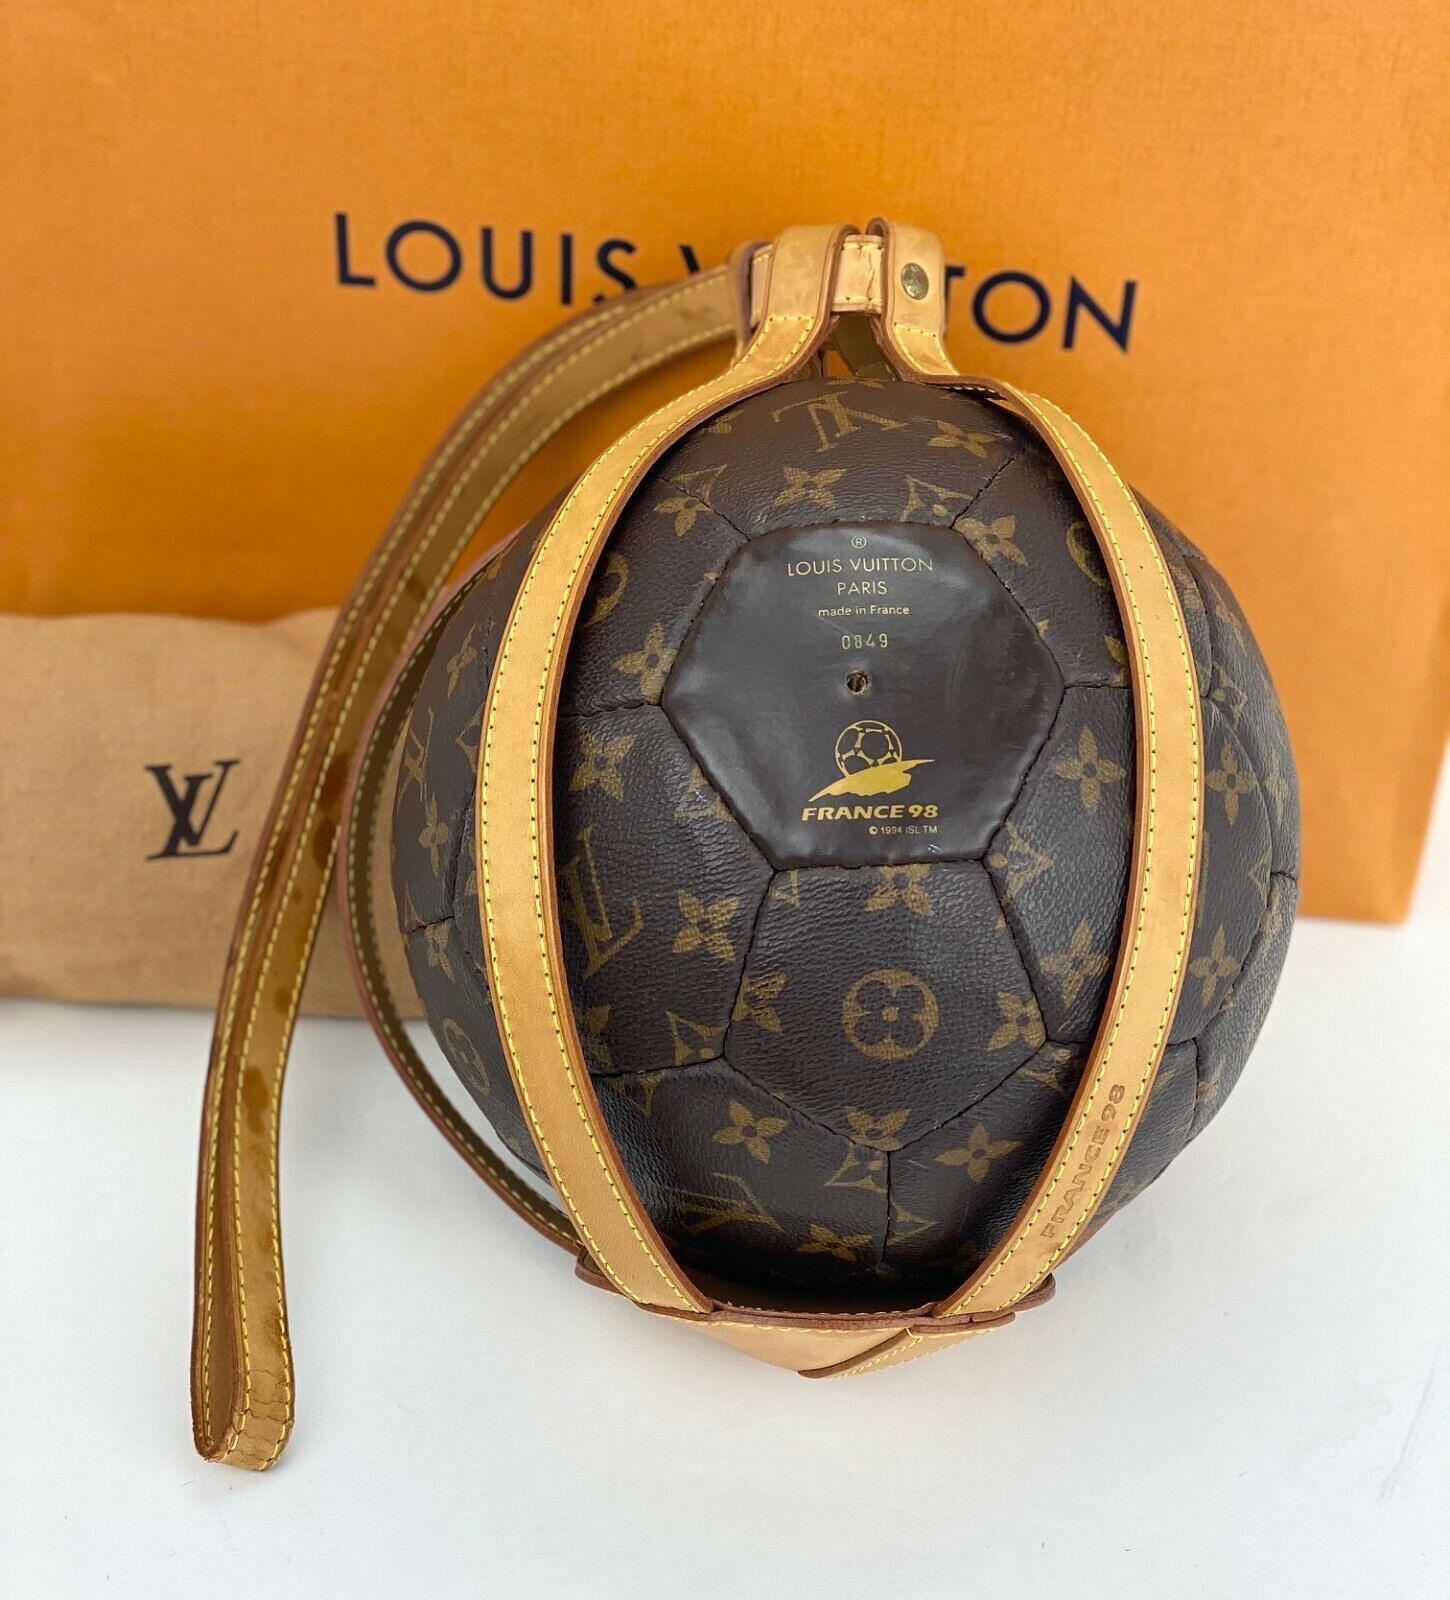 Louis Vuitton Fortune Cookie Bag Goes Viral and Sells Out – WWD